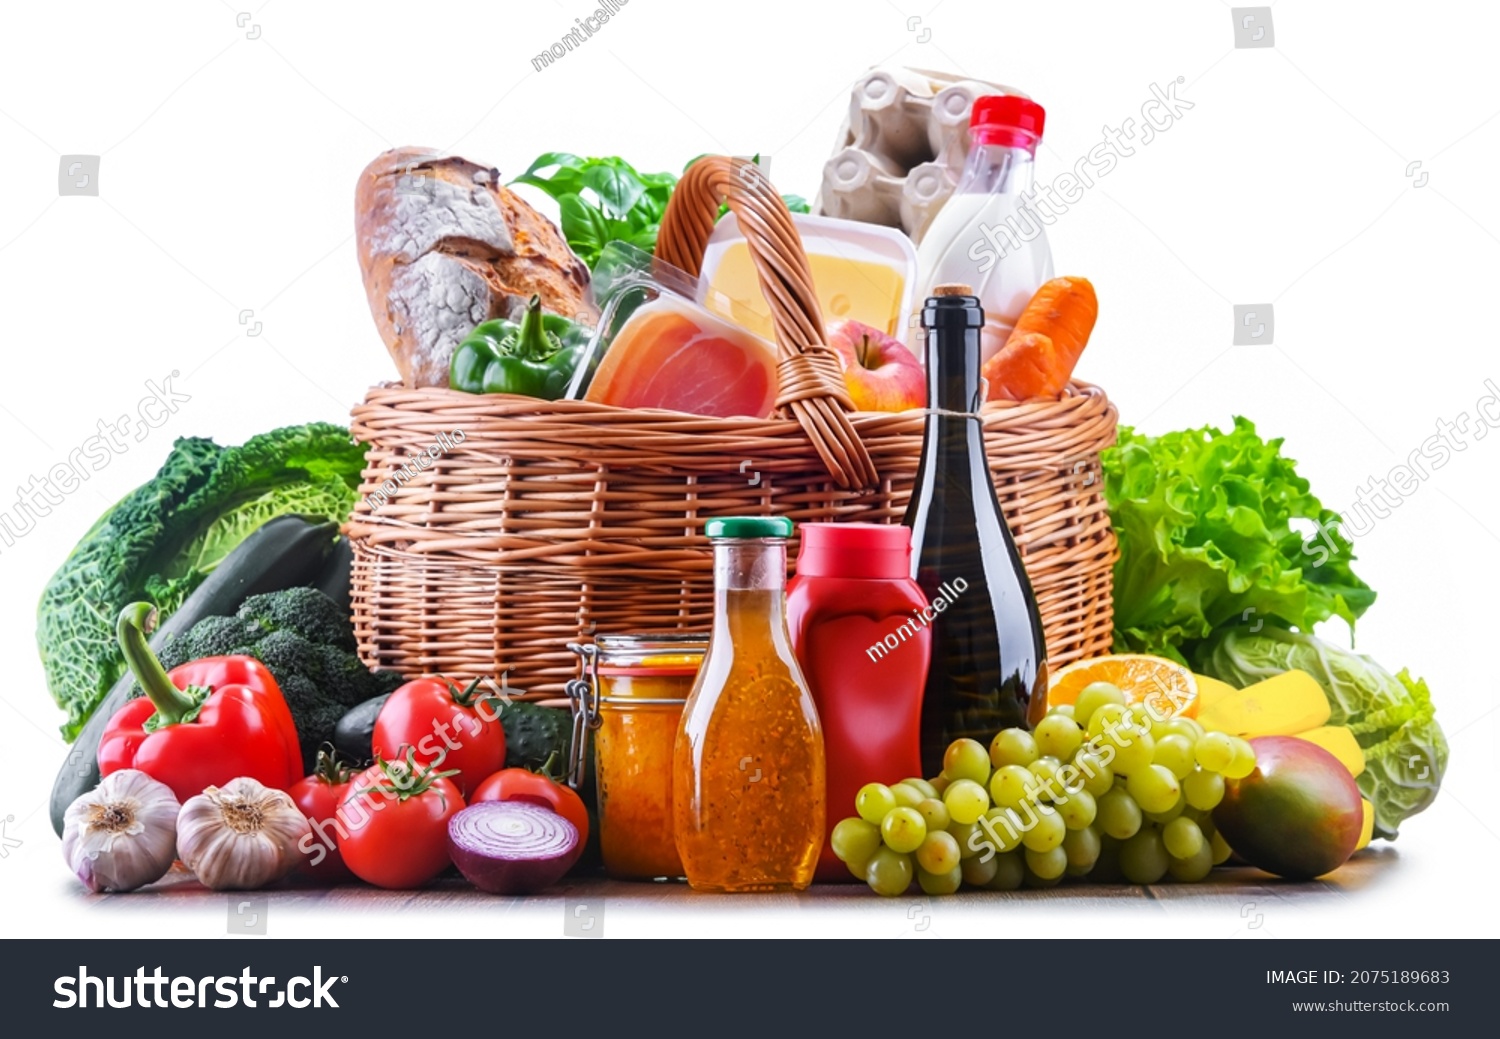 Wicker basket with assorted grocery products including fresh vegetables and fruits #2075189683